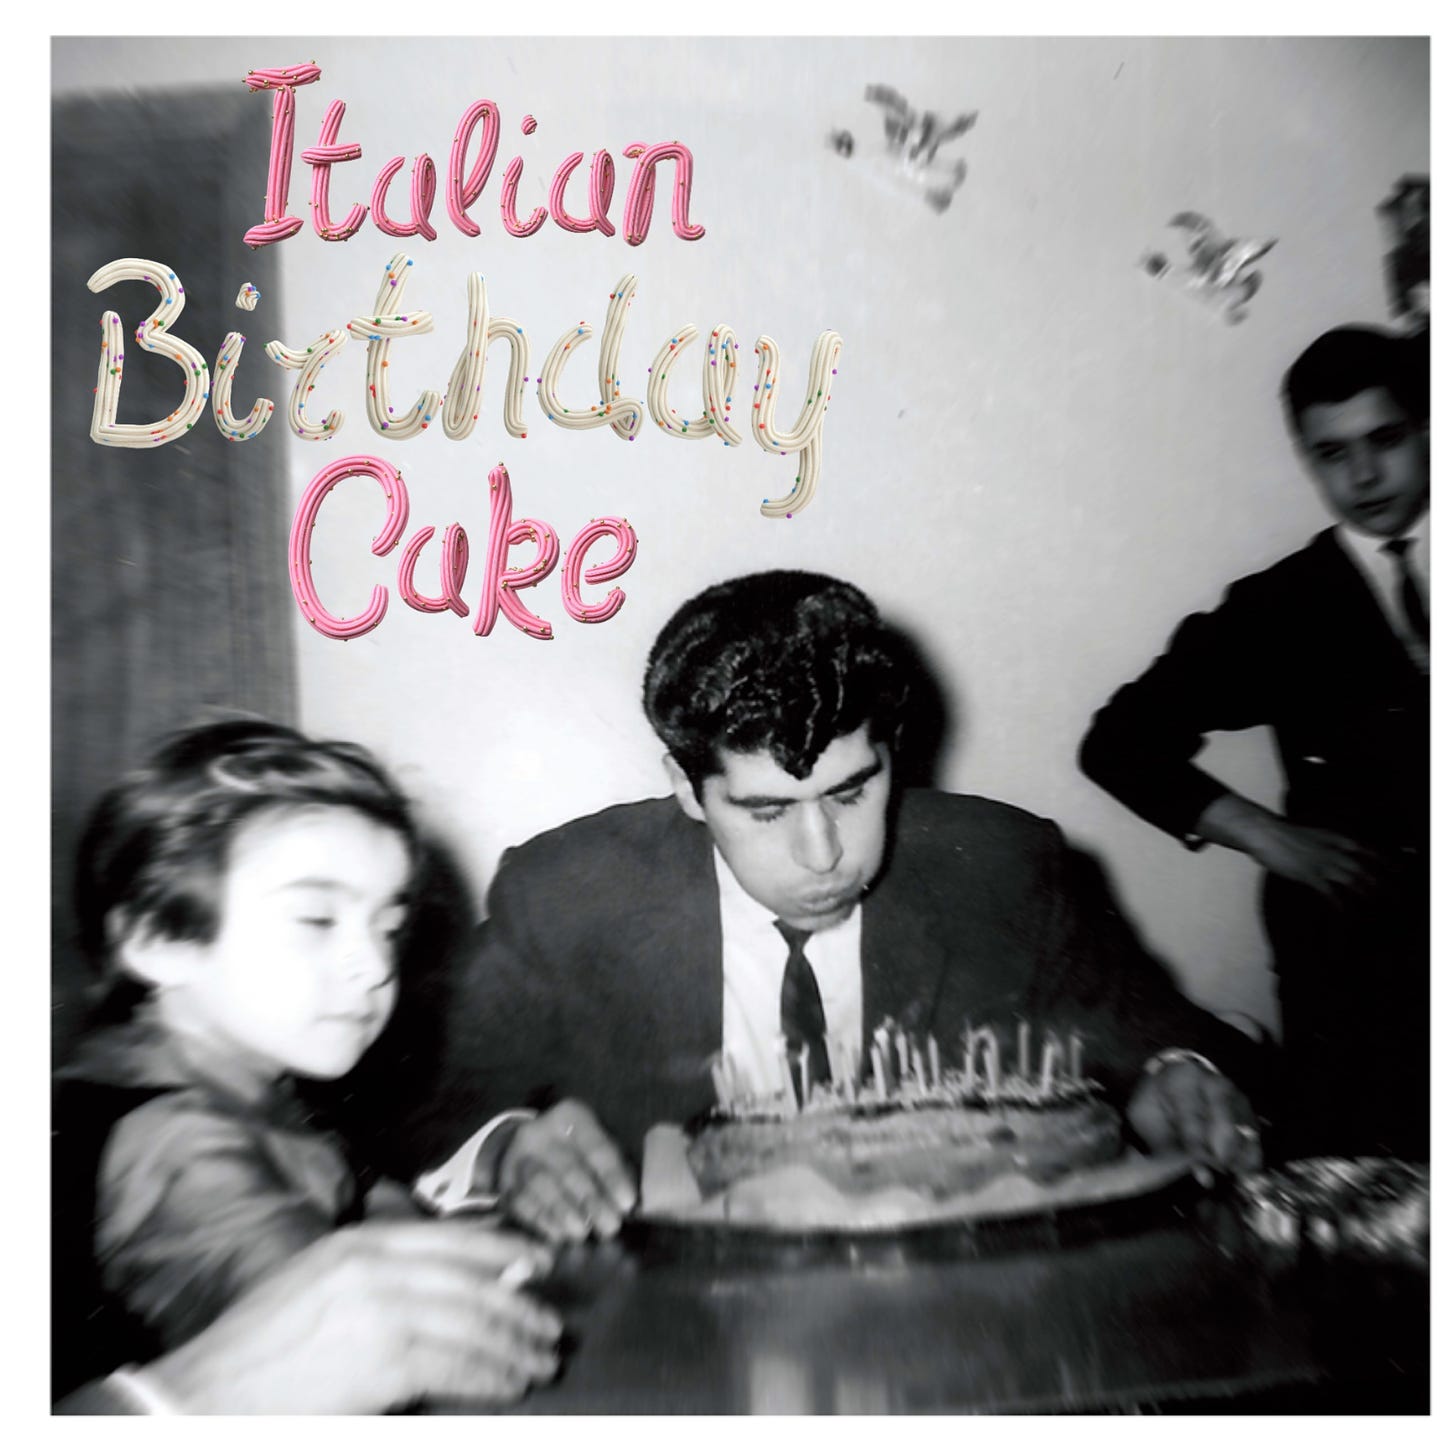 A black and white photo of a man blowing out candles on an Italian birthday cake. "Italian Birthday Cake" is written in icing in the top left corner.